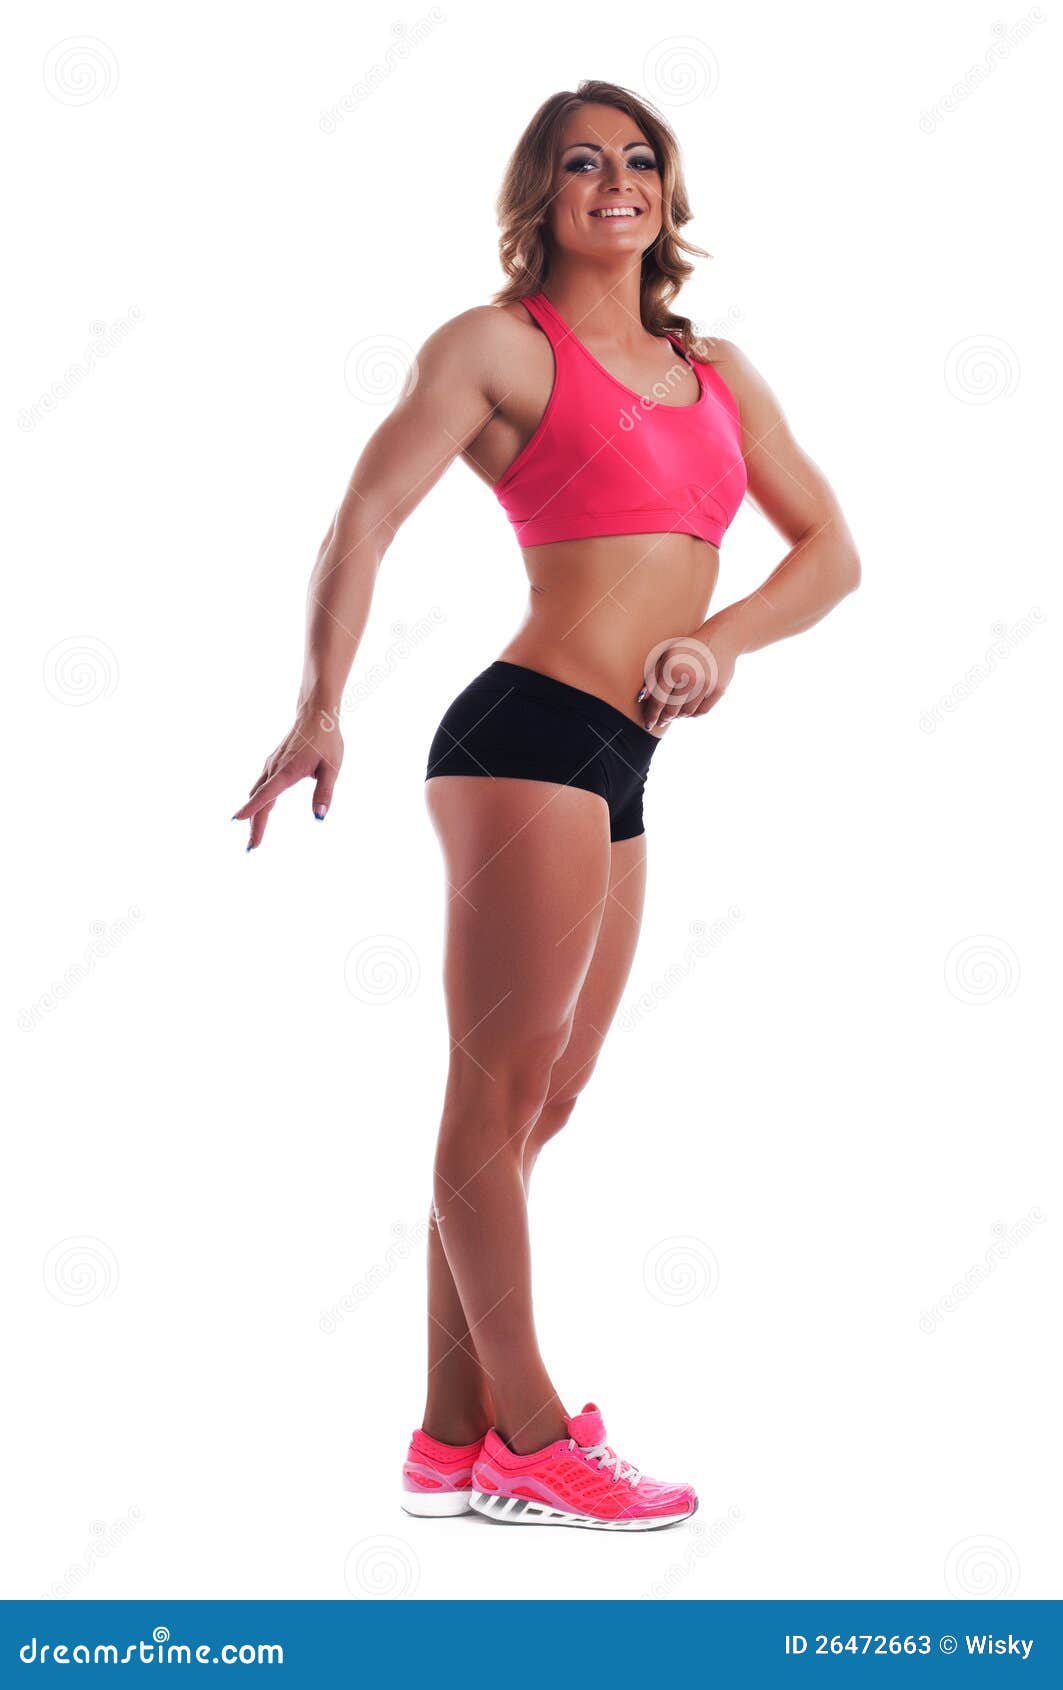 Perfect Beauty Woman with Muscle Body Full Height Stock Image - Image of  fitness, person: 26472663